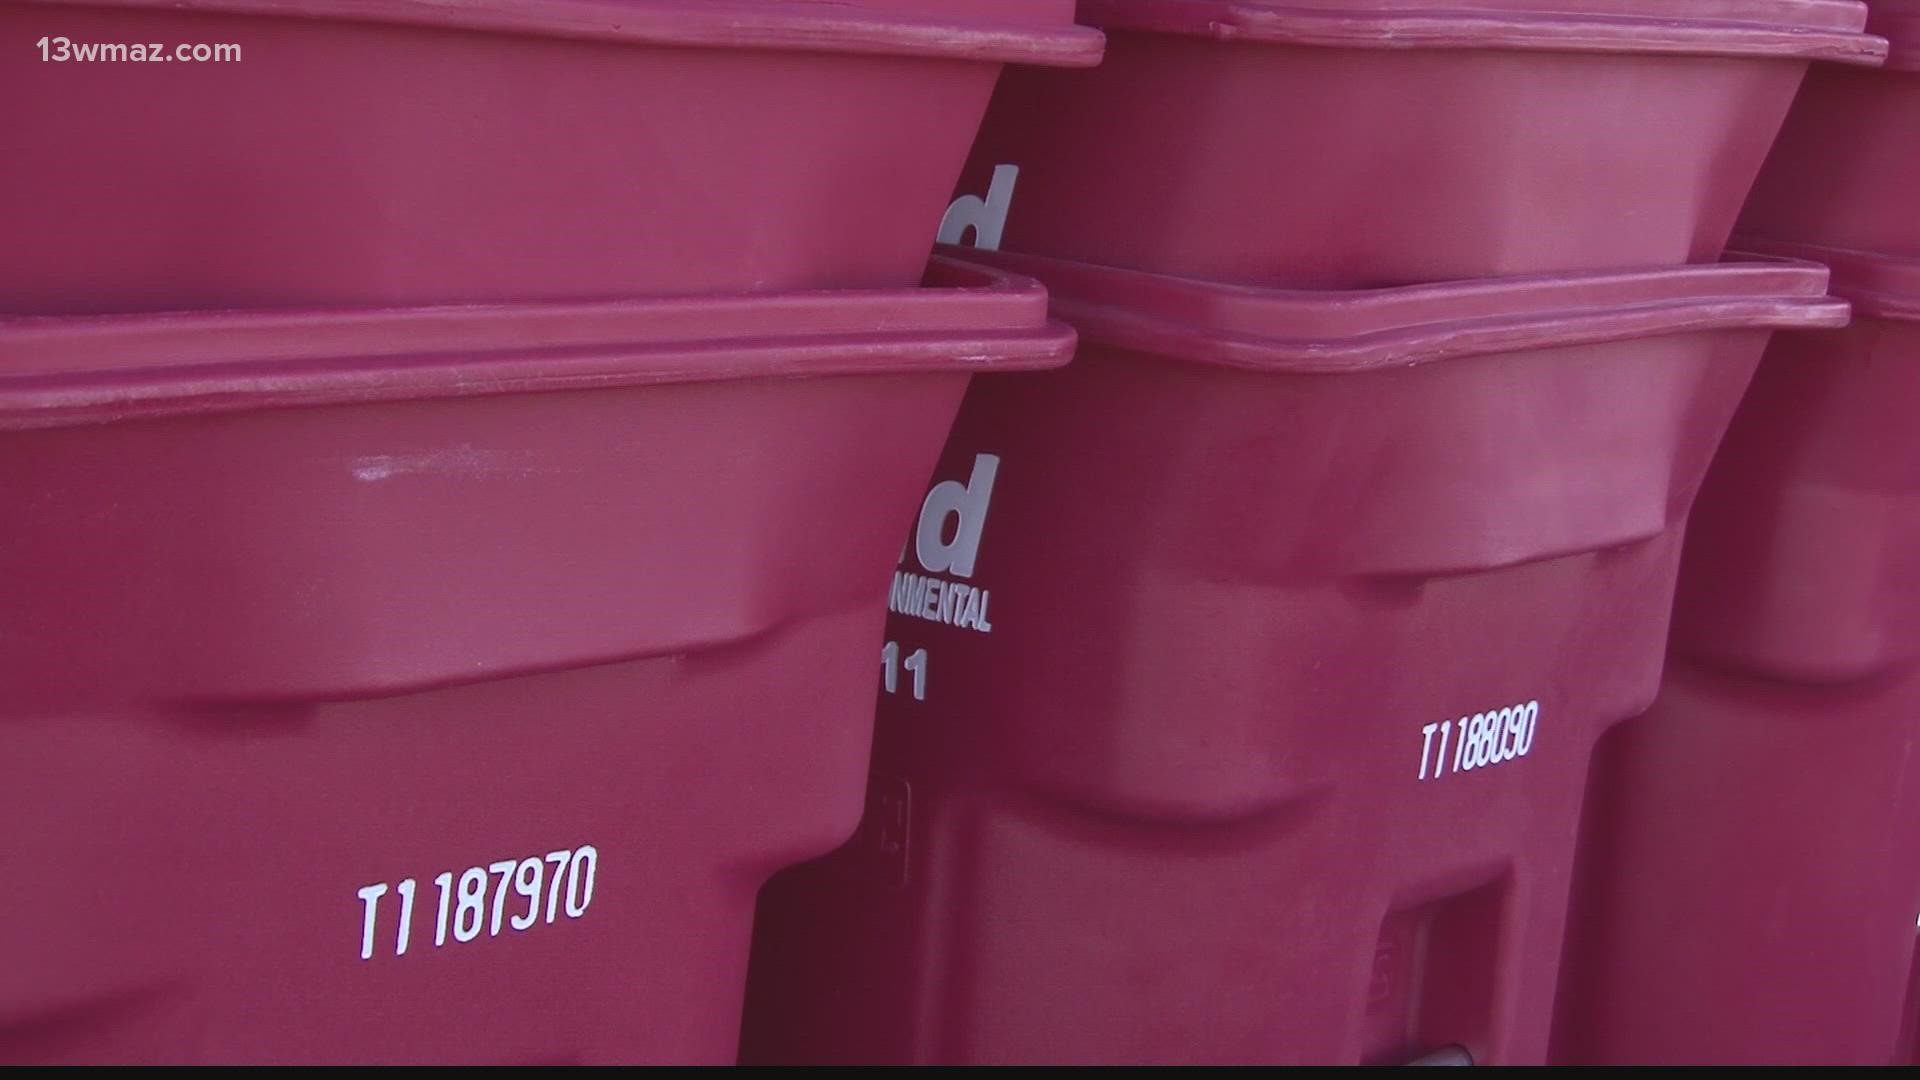 If you've driven past the old Macon Mall, you may notice there are thousands of trash bins in the parking lot. They're coming to your neighborhood.